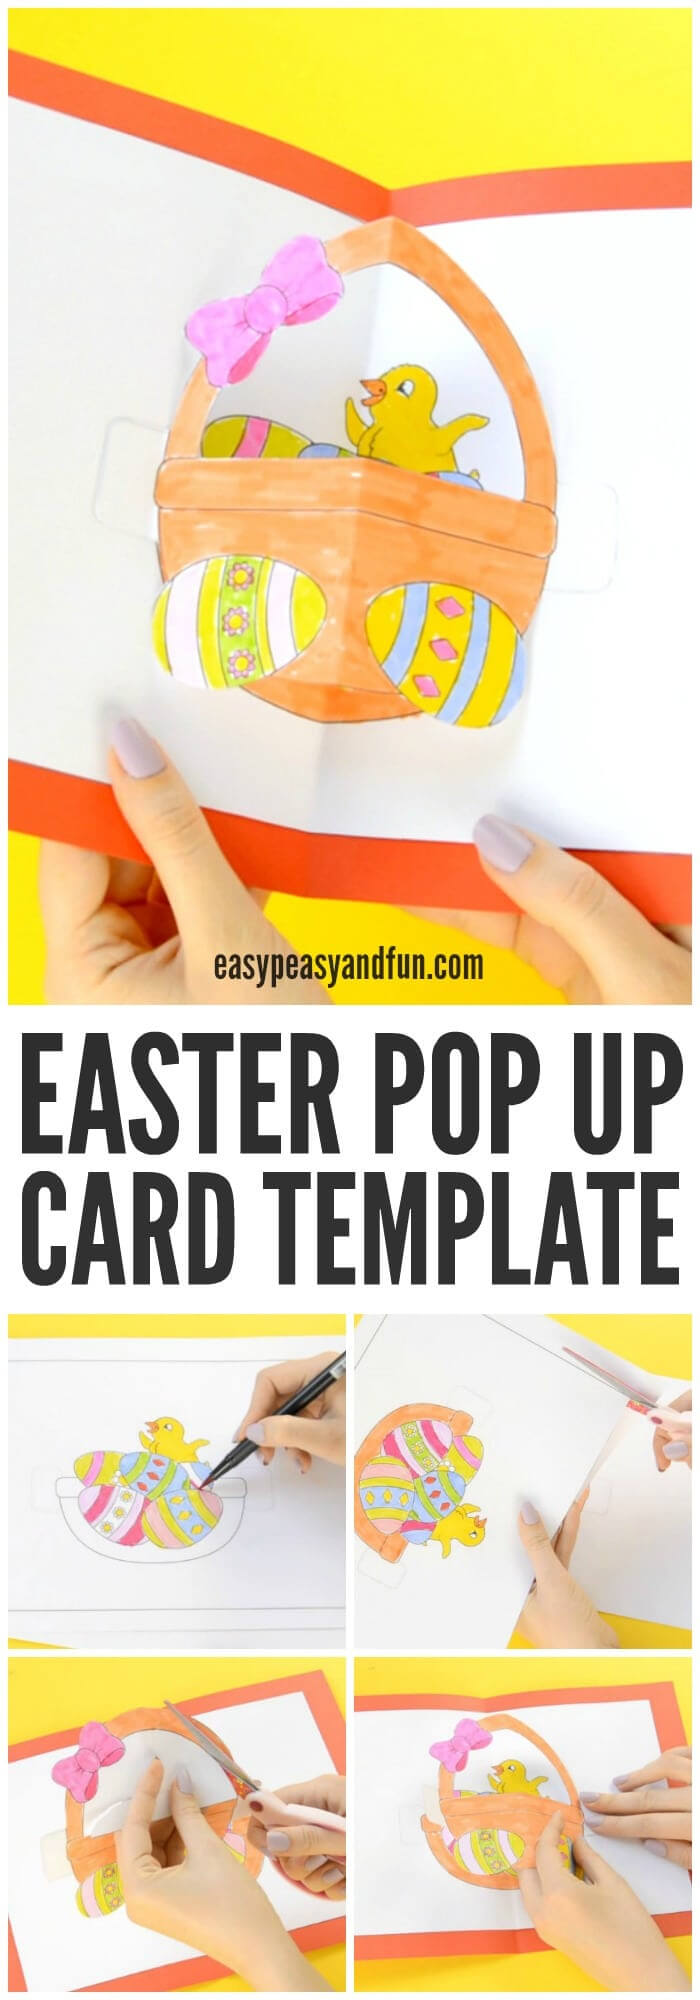 Pop Up Easter Card Template Ks2 – Hd Easter Images With In Easter Card Template Ks2